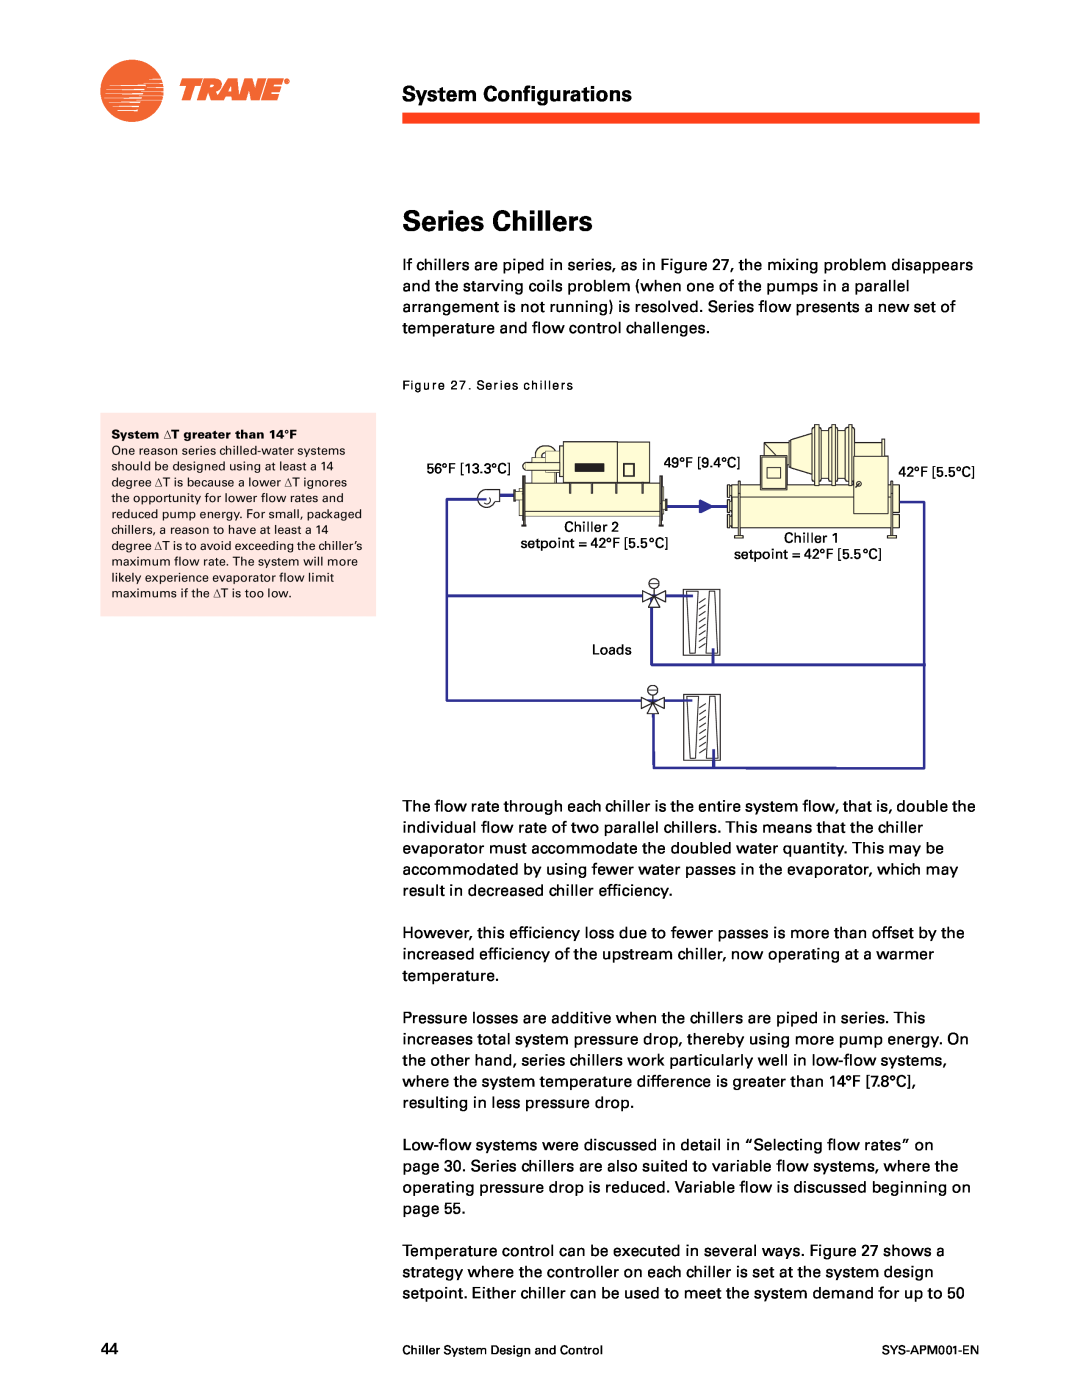 Trane SYS-APM001-EN manual Series Chillers, System Configurations, Series chillers 